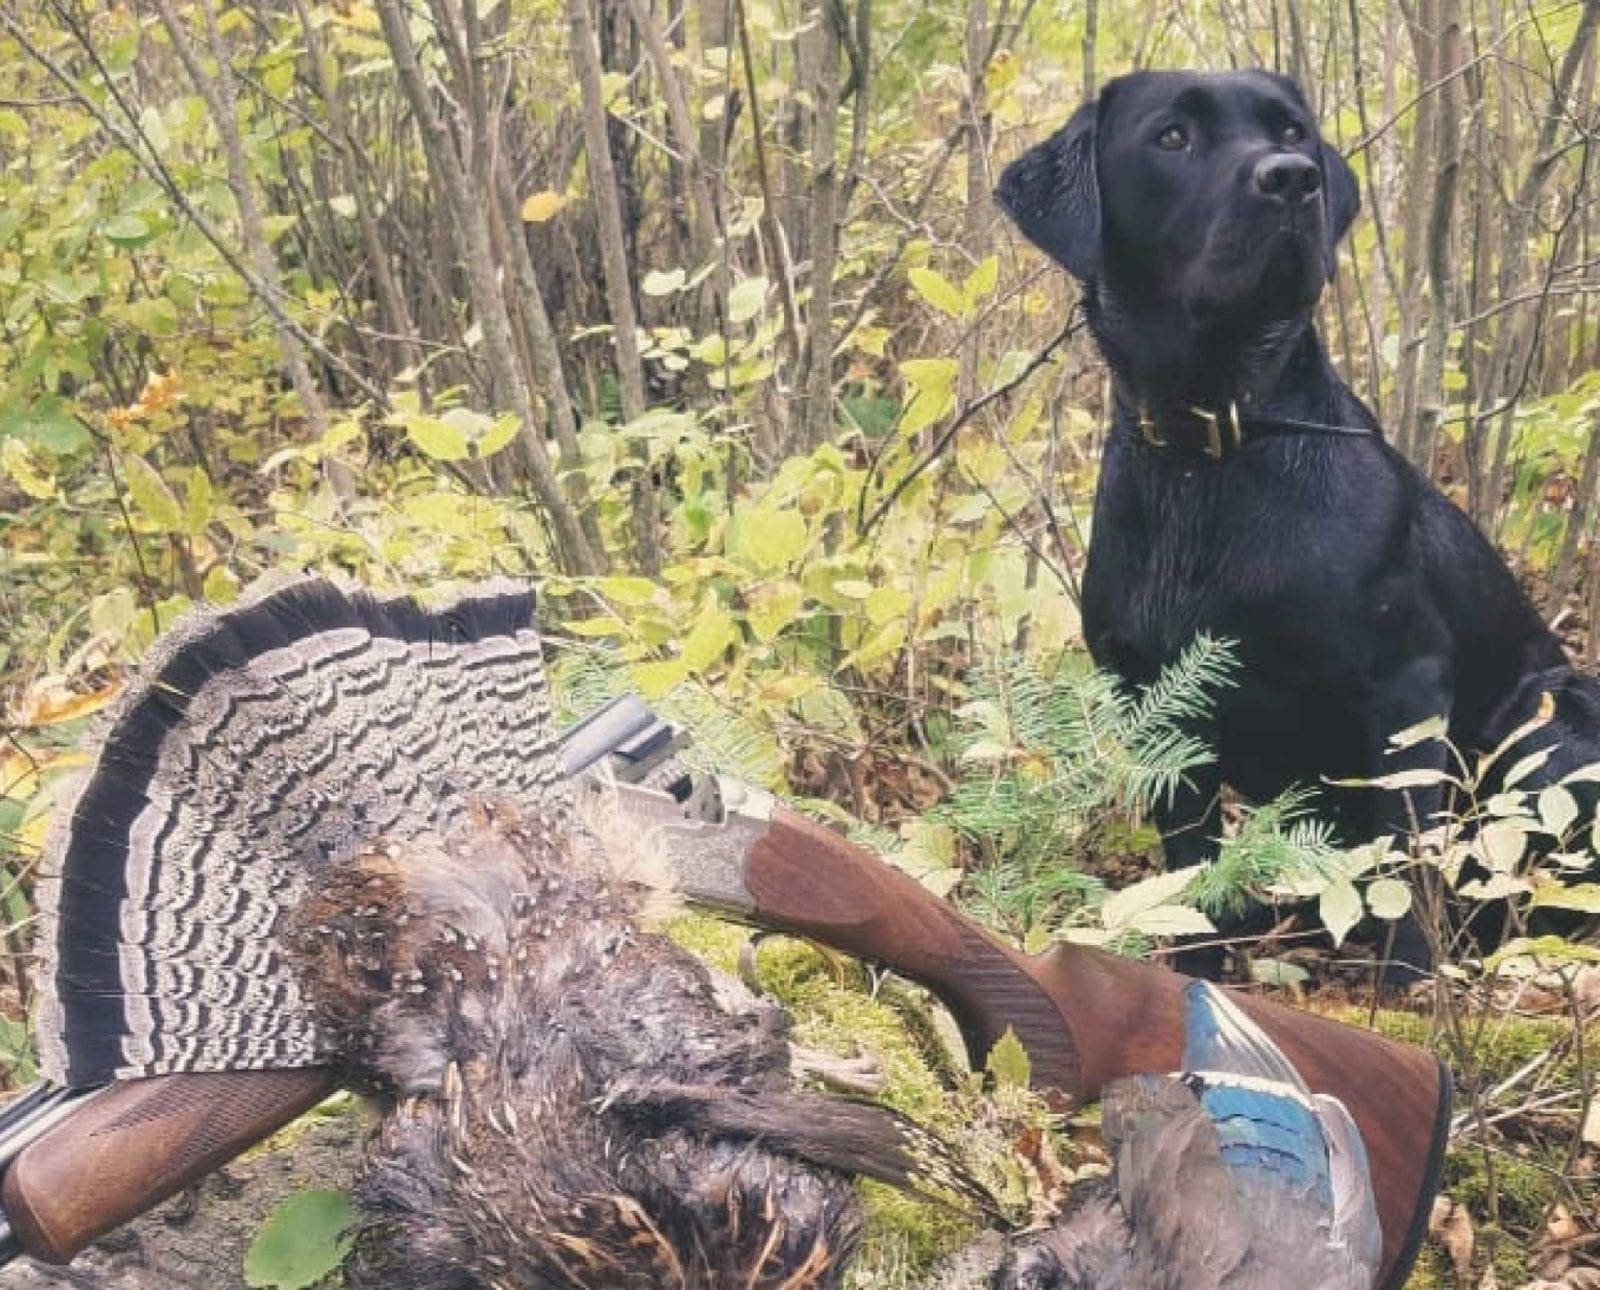 Scott with his Labrador Retriever on a ruffed grouse hunt.